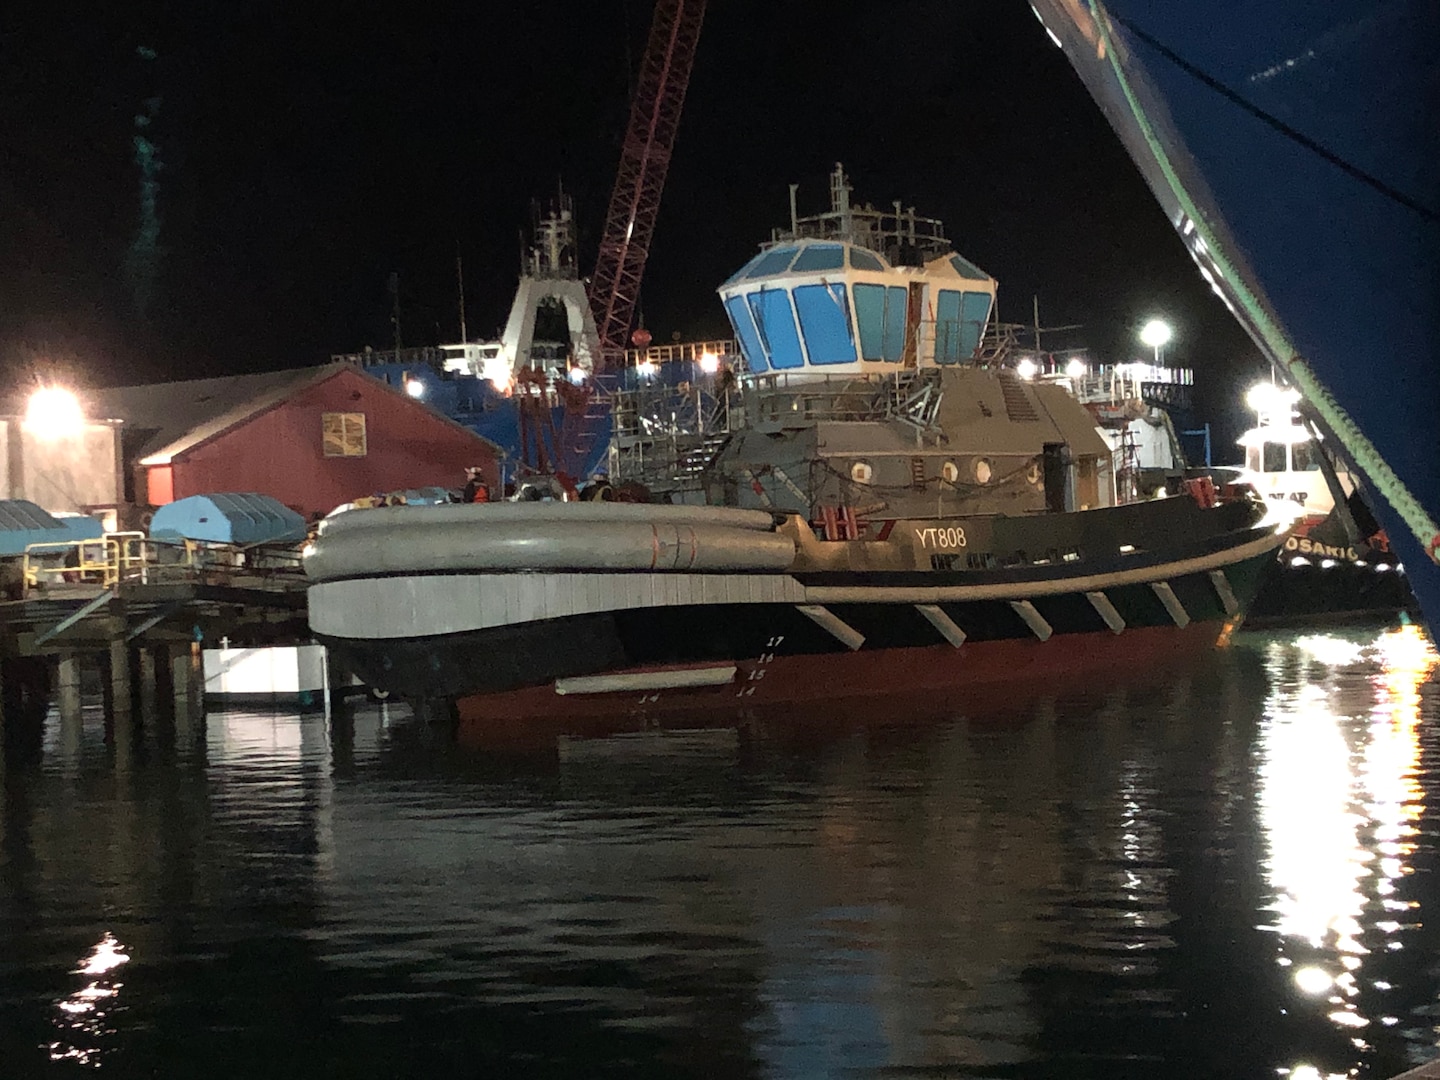 The Navy's first Yard Tug 808-class vessel docks in Anacortes, Washington after being successfully launched by Dakota Creek Industries.